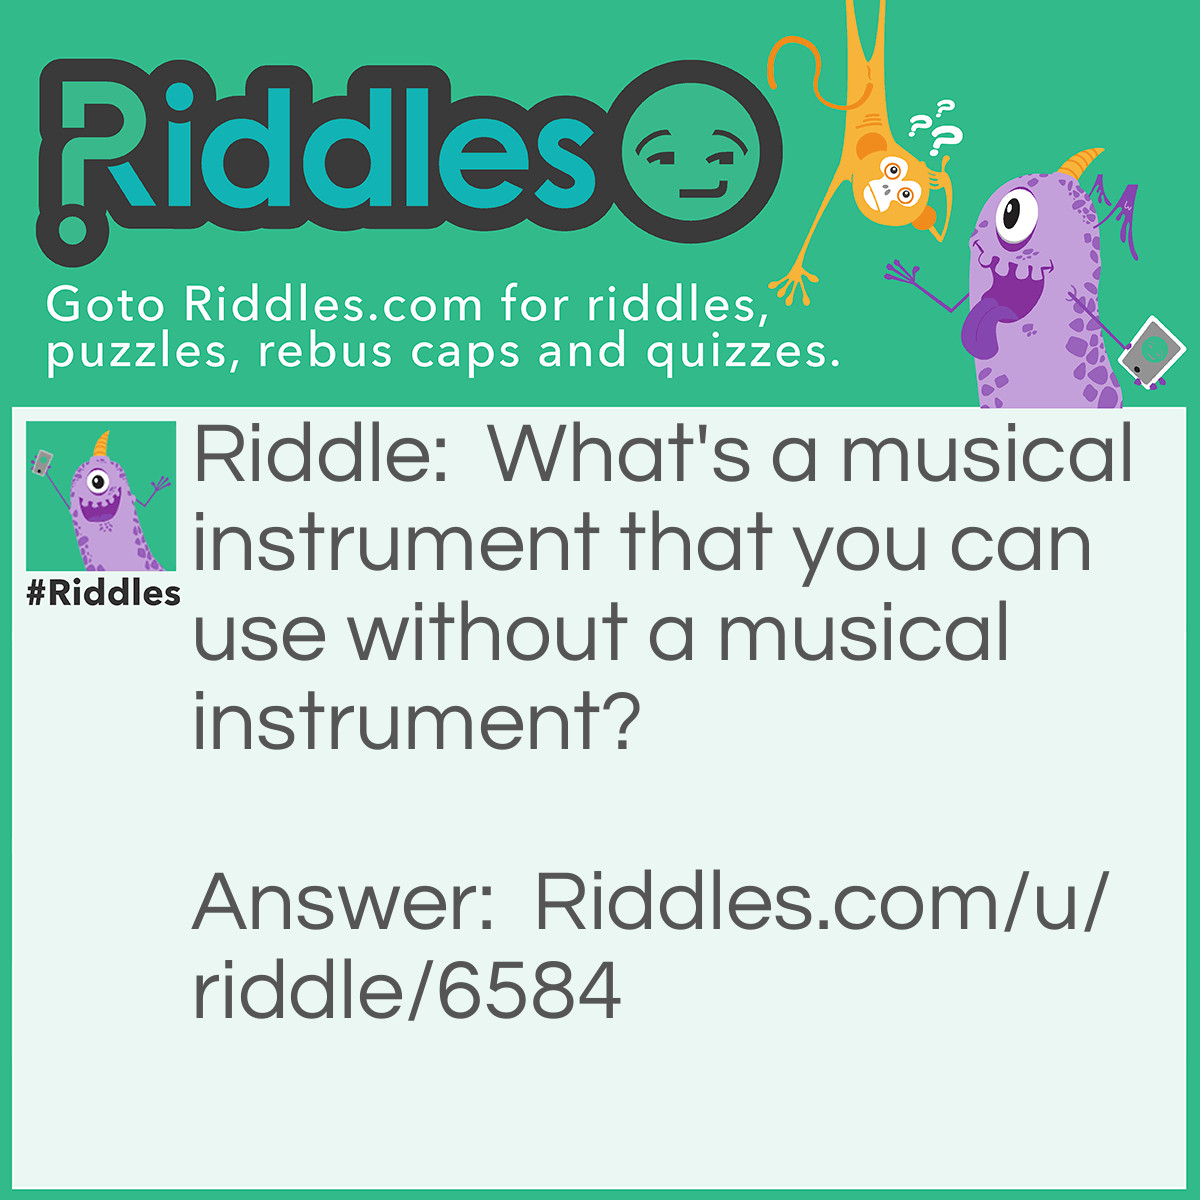 Riddle: What's a musical instrument that you can use without a musical instrument? Answer: You're voice.